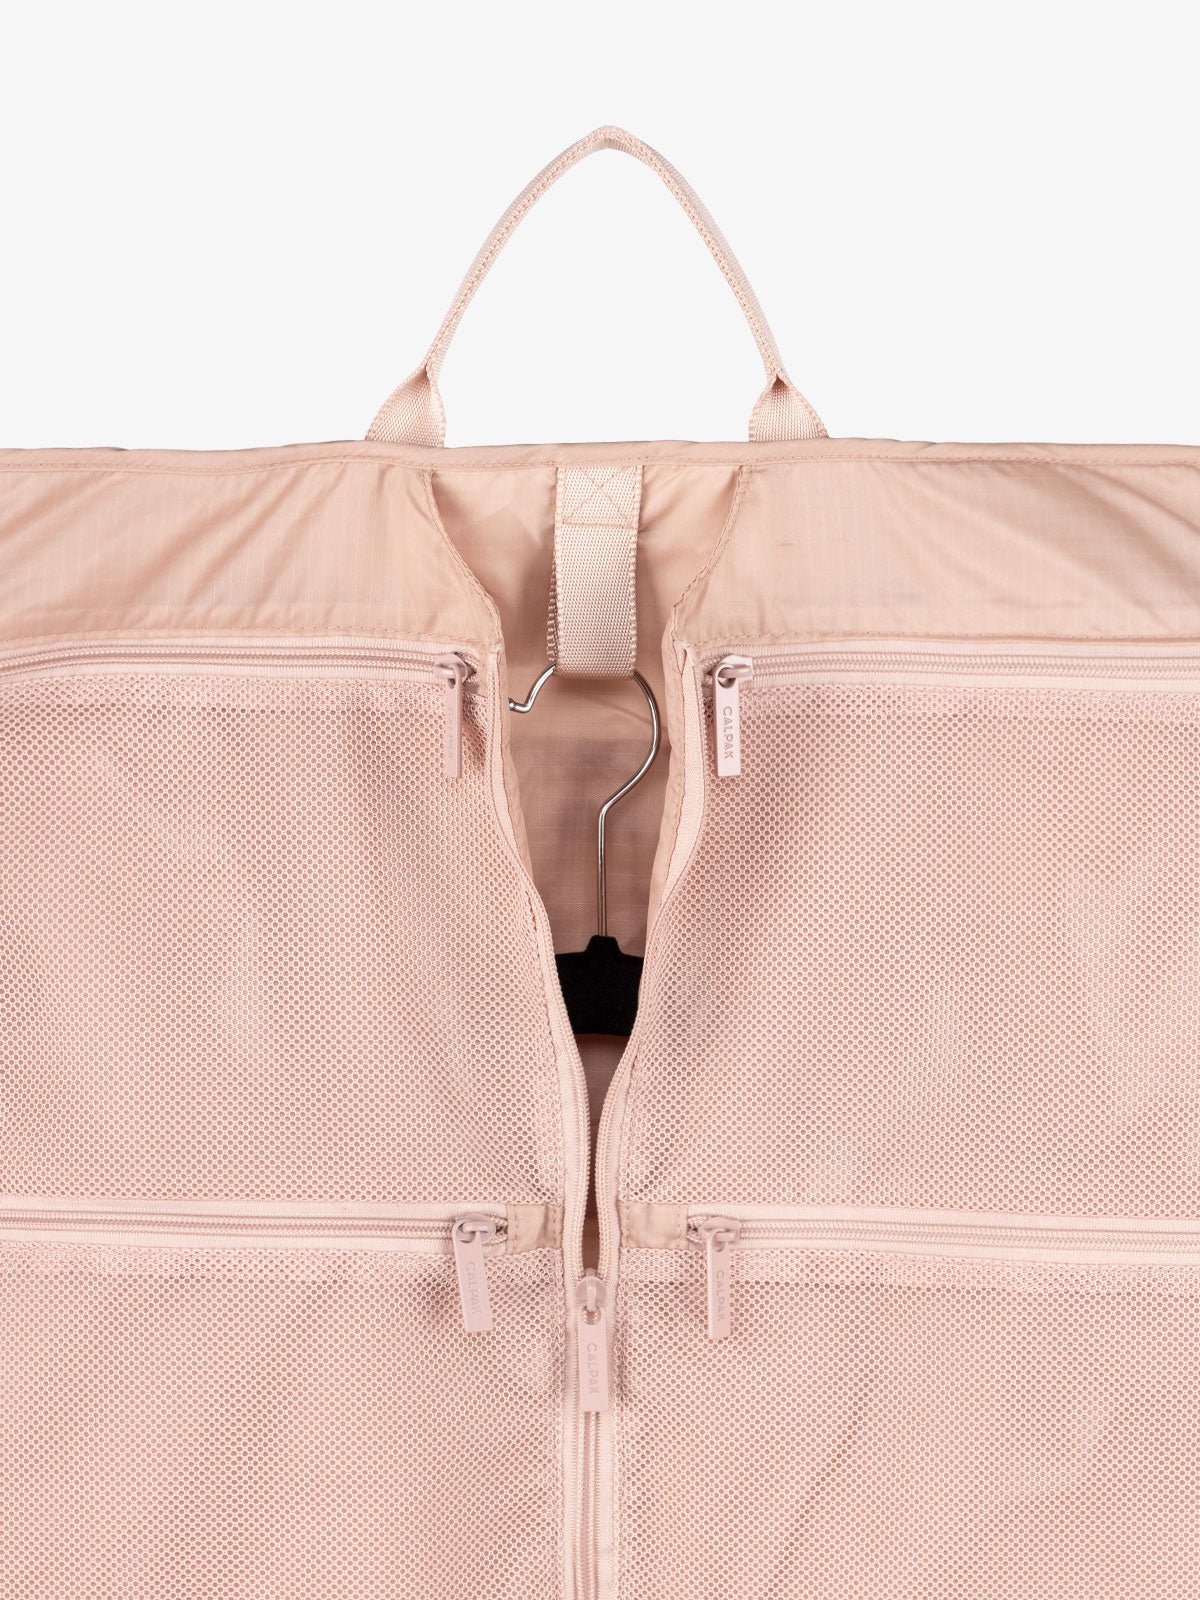 garment storage with handle and mesh pockets in light pink